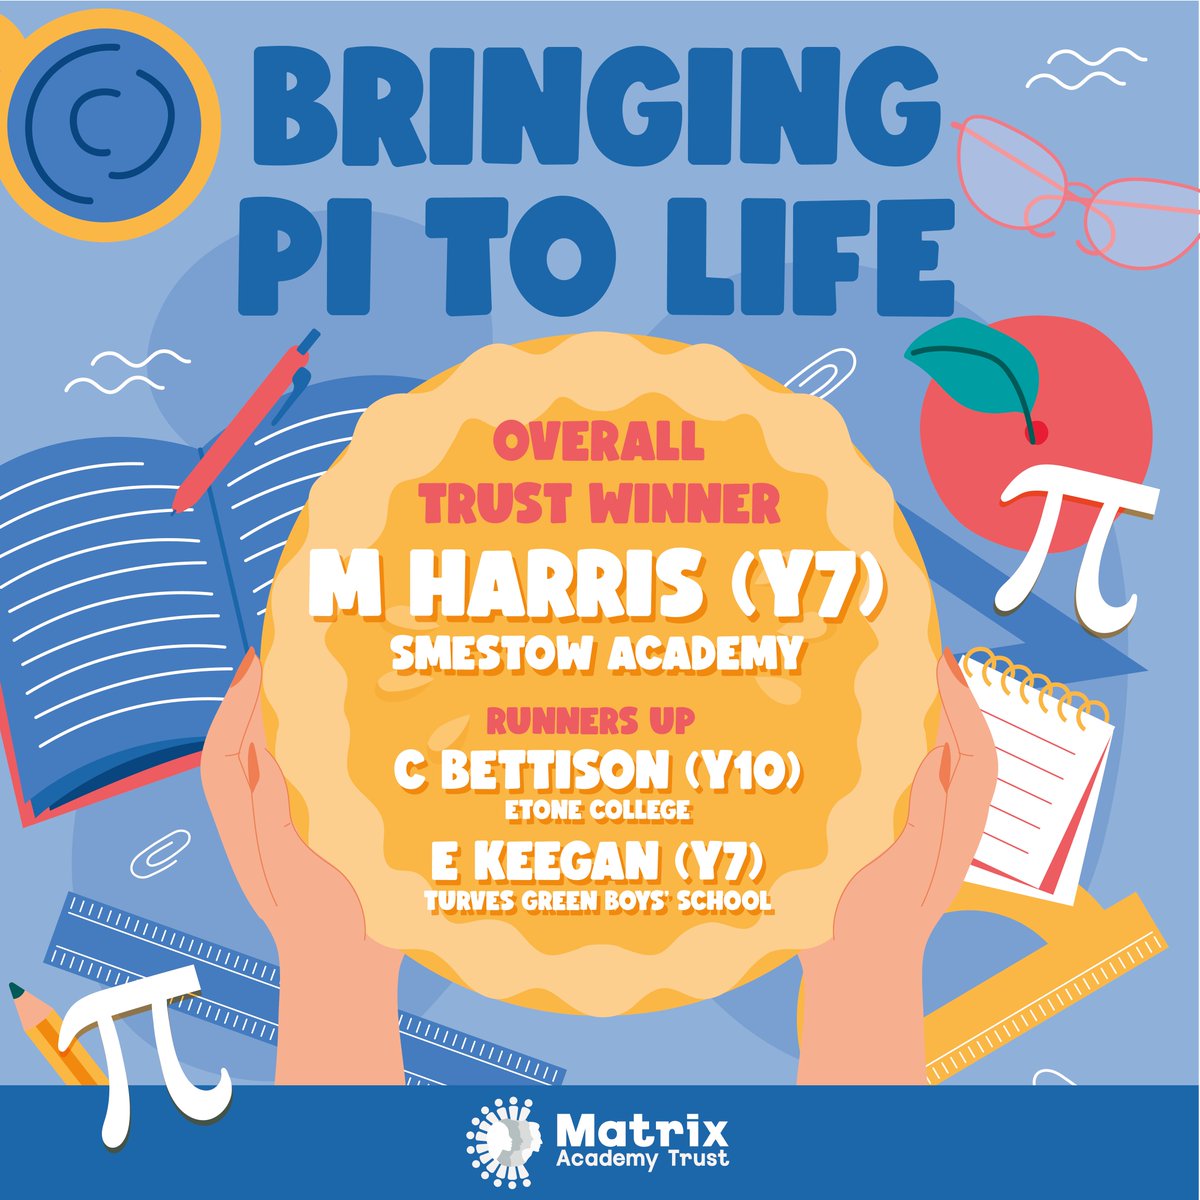 In March, pupils across @MatrixAcademyT were invited to enter a Maths competition to celebrate Pi Day.

M Harris from Smestow Academy was our overall winner and has received a £30 Amazon voucher🎉

Read more: bit.ly/4dlwDlJ
#PiDay